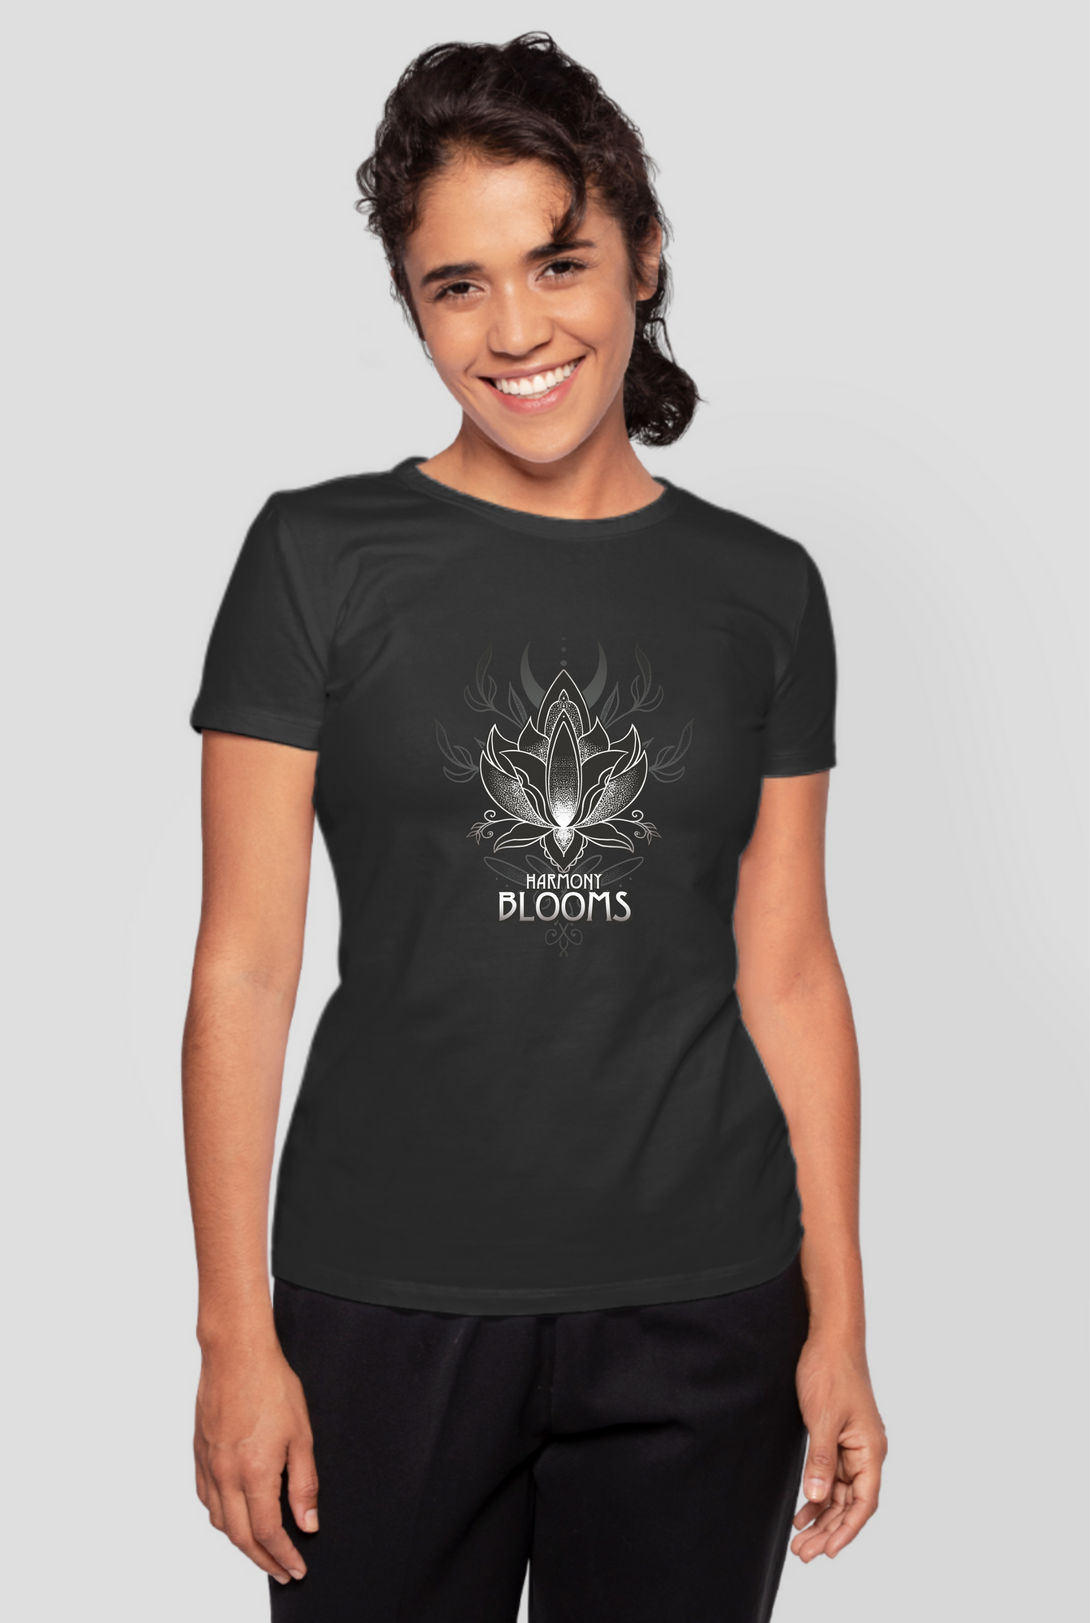 Harmony Blooms Printed T-Shirt For Women - WowWaves - 12